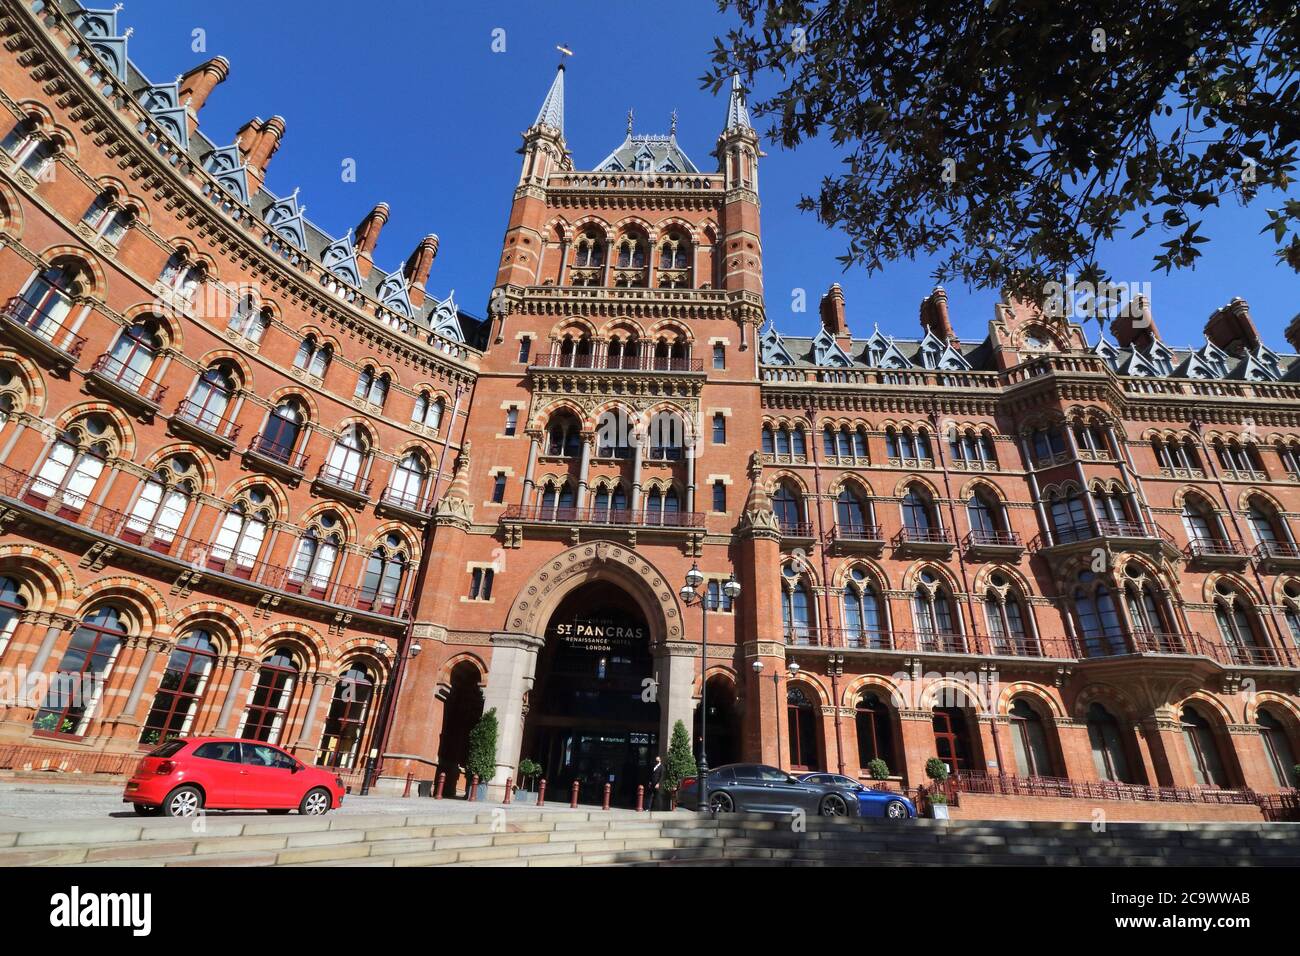 London, UK. 1st Aug, 2020. The main entrance of the Renaissance St Pancras hotel.Many of London's 5 star Luxury Hotels which are world renowned are still closed, despite the government's loosening of the hospitality sector's restrictions. With travel from the USA still minimal and weddings, society gatherings and corporate events at hugely reduced levels, these high end destinations are either closed or running on skeleton staffing. Credit: Keith Mayhew/SOPA Images/ZUMA Wire/Alamy Live News Stock Photo